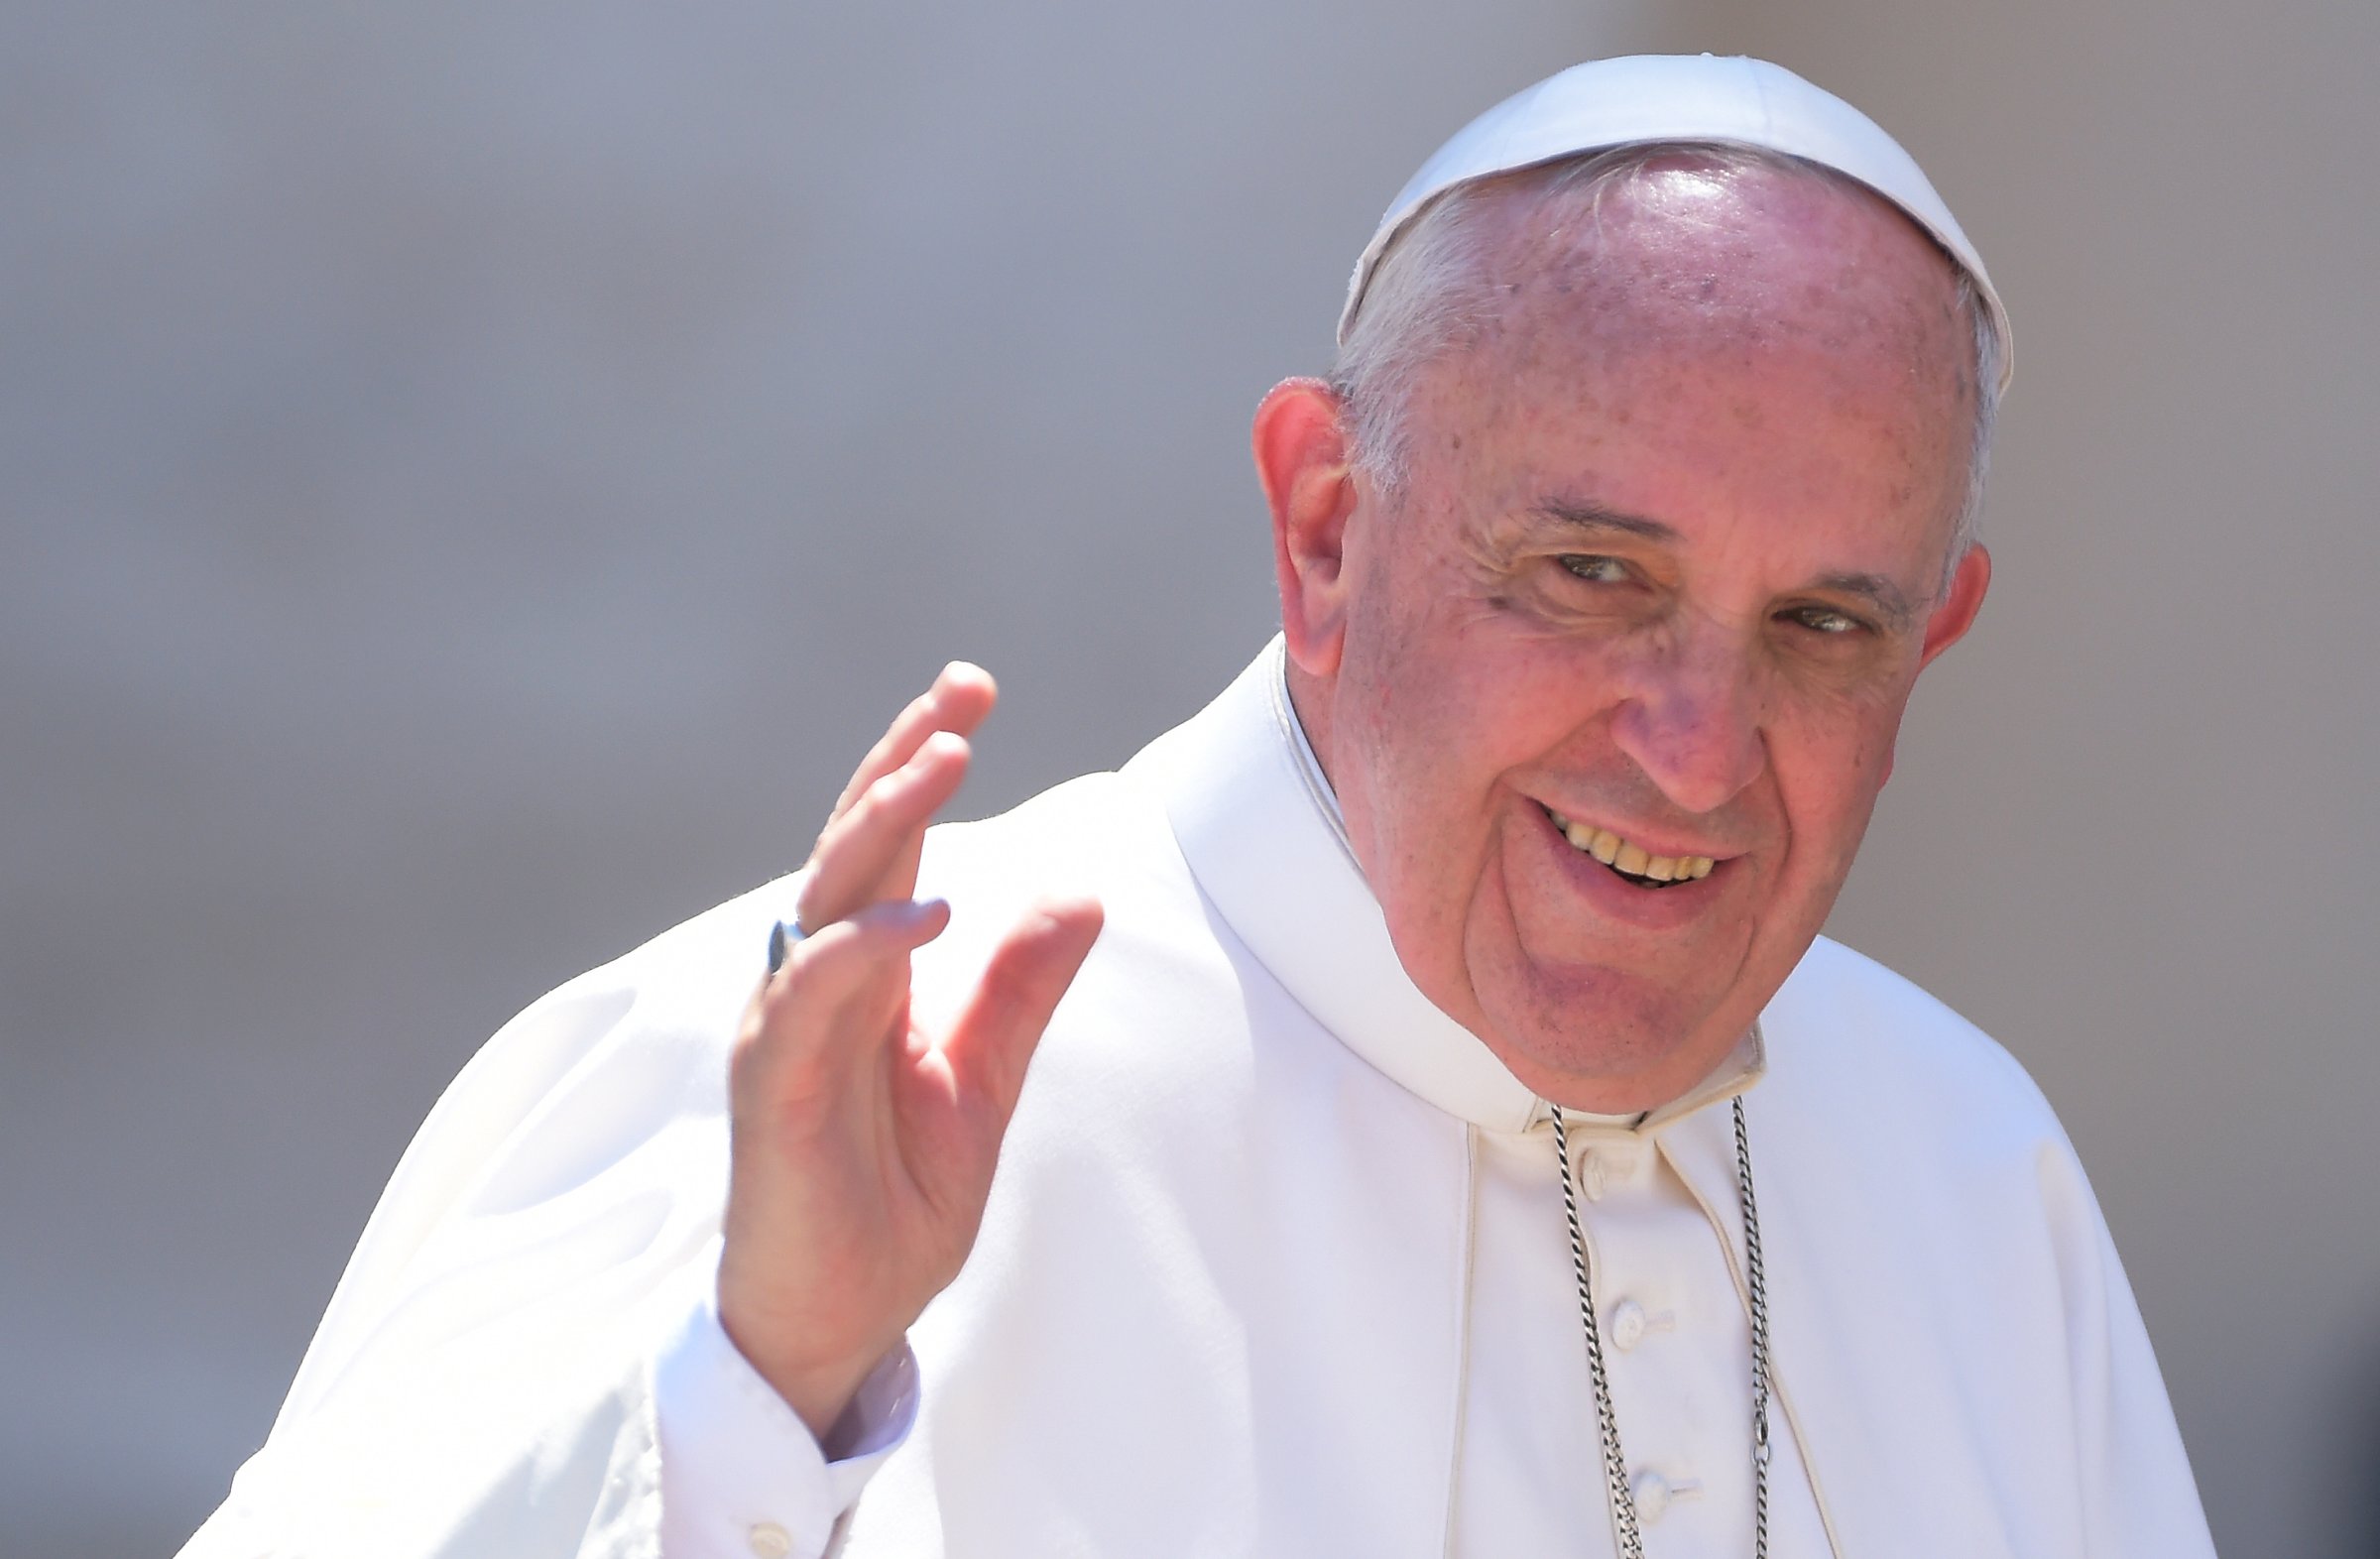 Pope Francis attends the weekly general audience in Saint Peter's square at the Vatican on April 22, 2015.